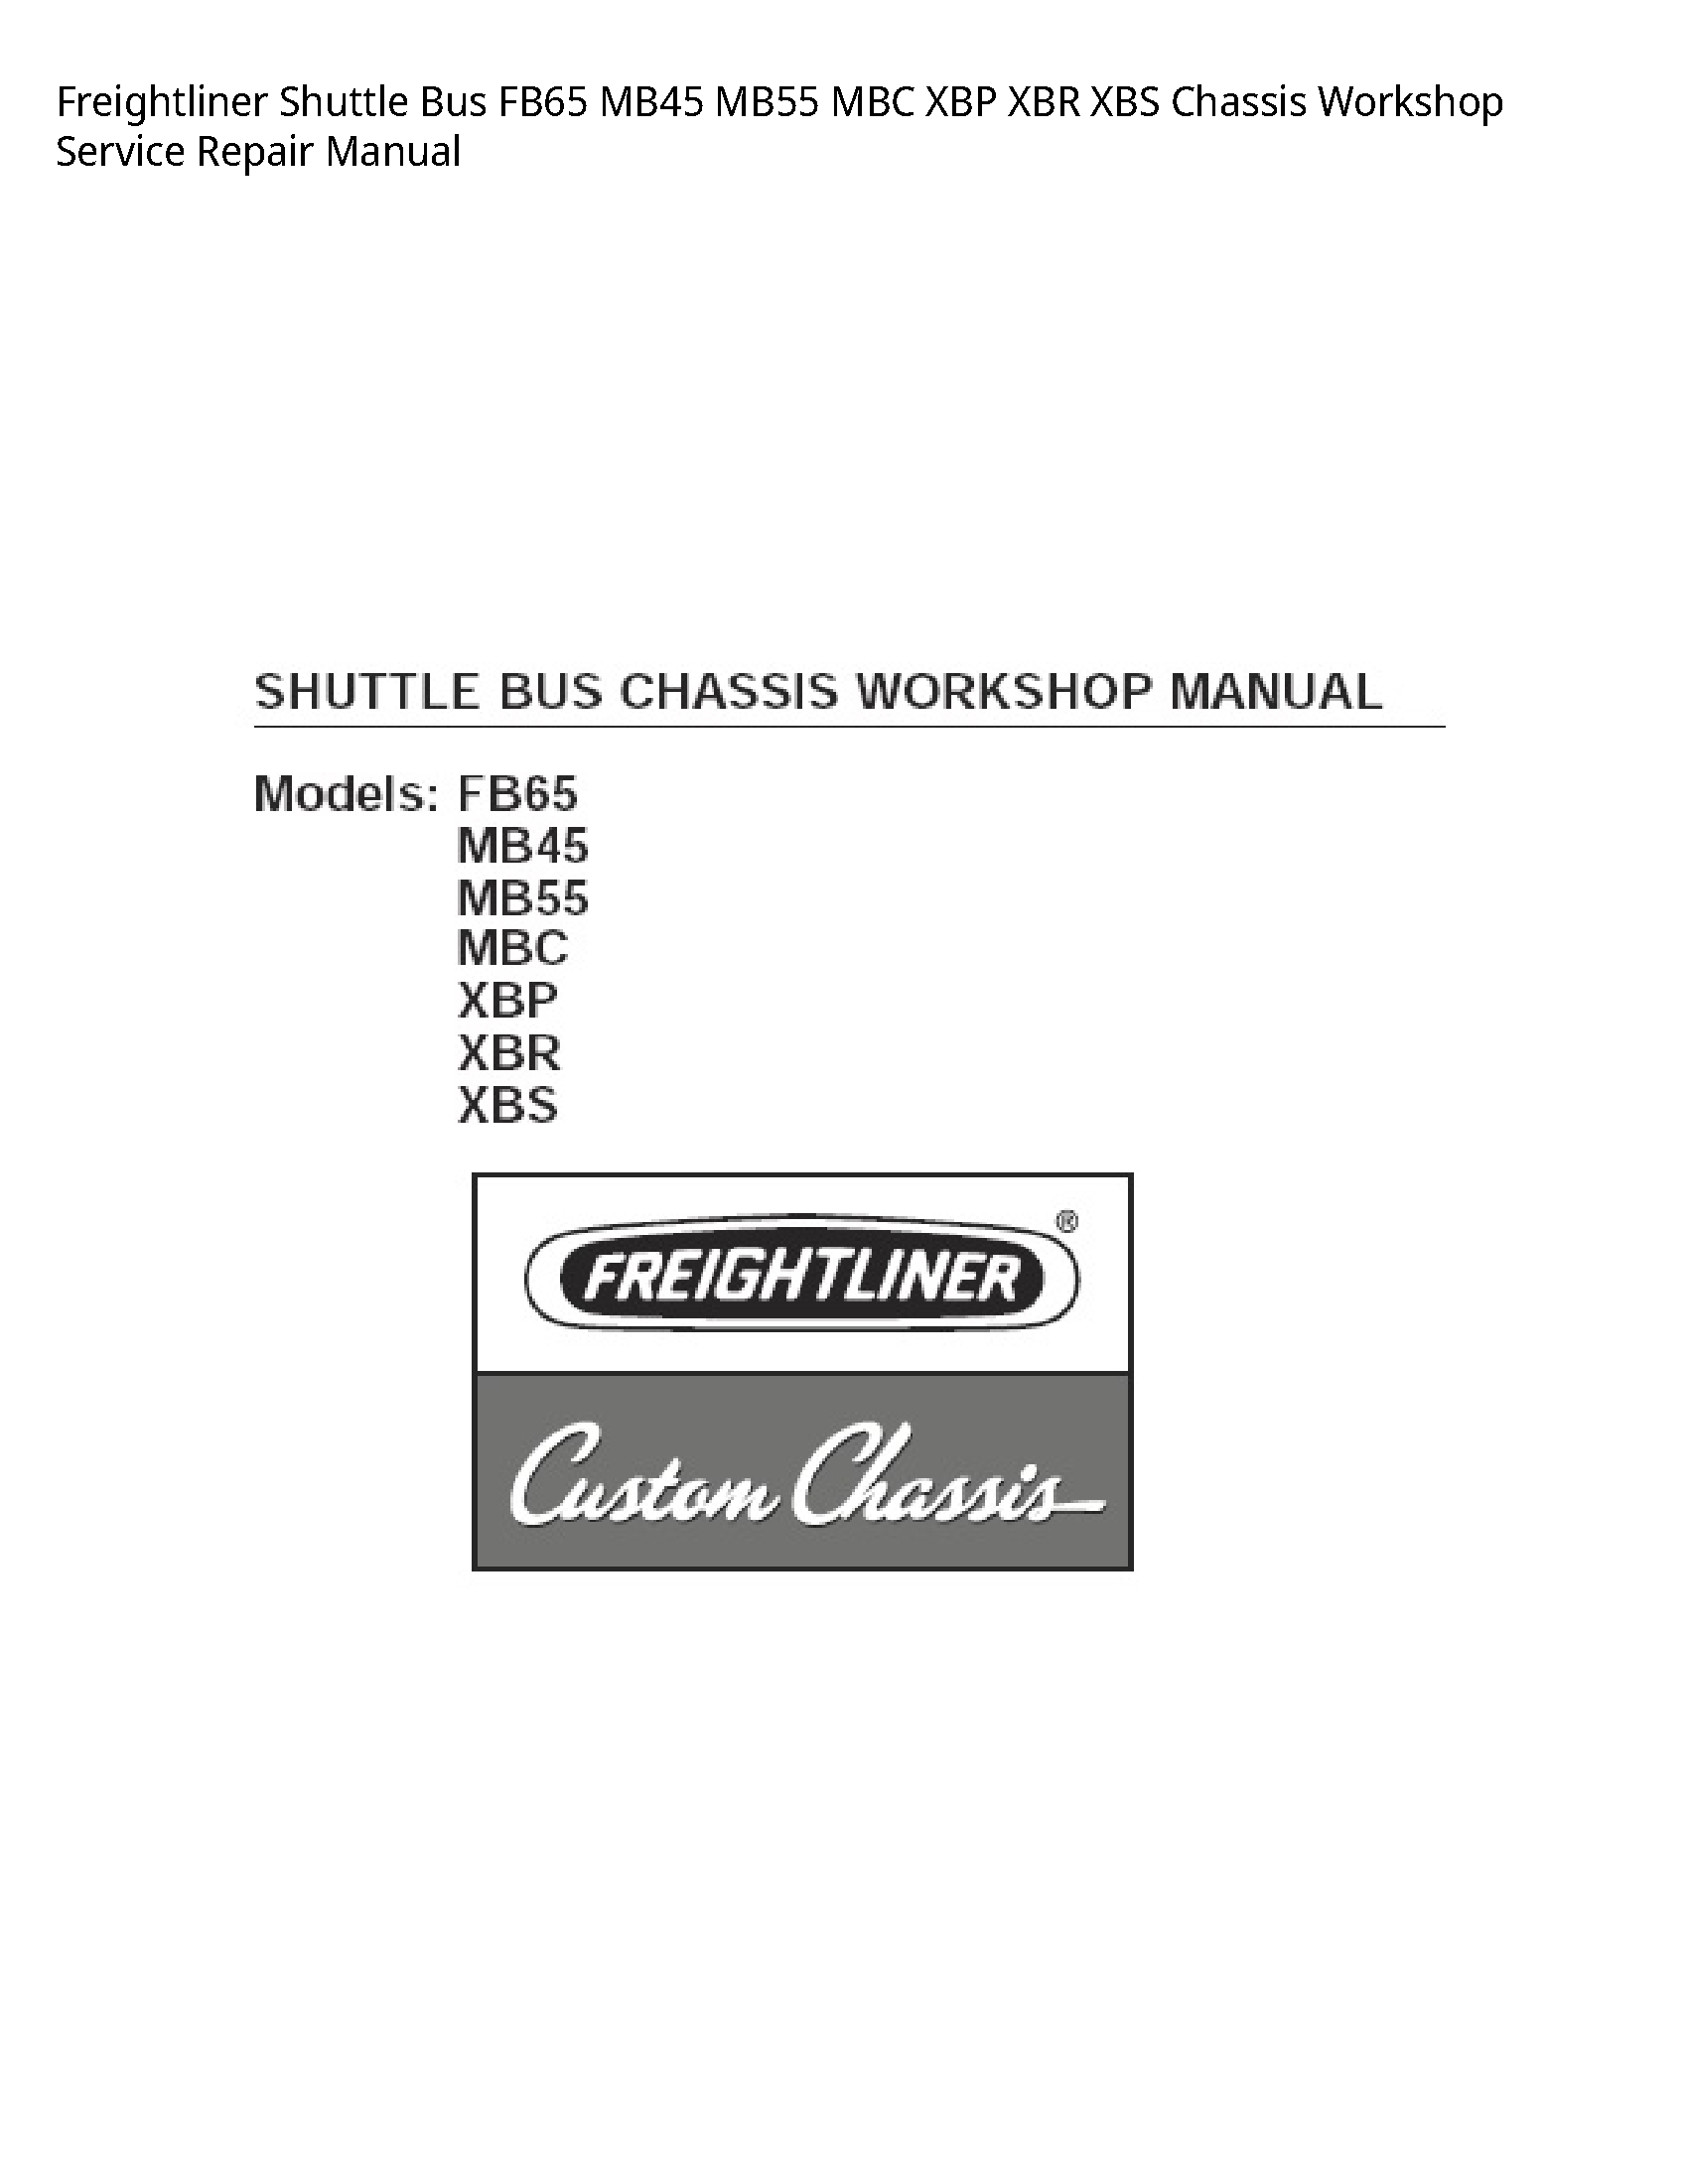 Freightliner FB65 Shuttle Bus MBC XBP XBR XBS Chassis manual